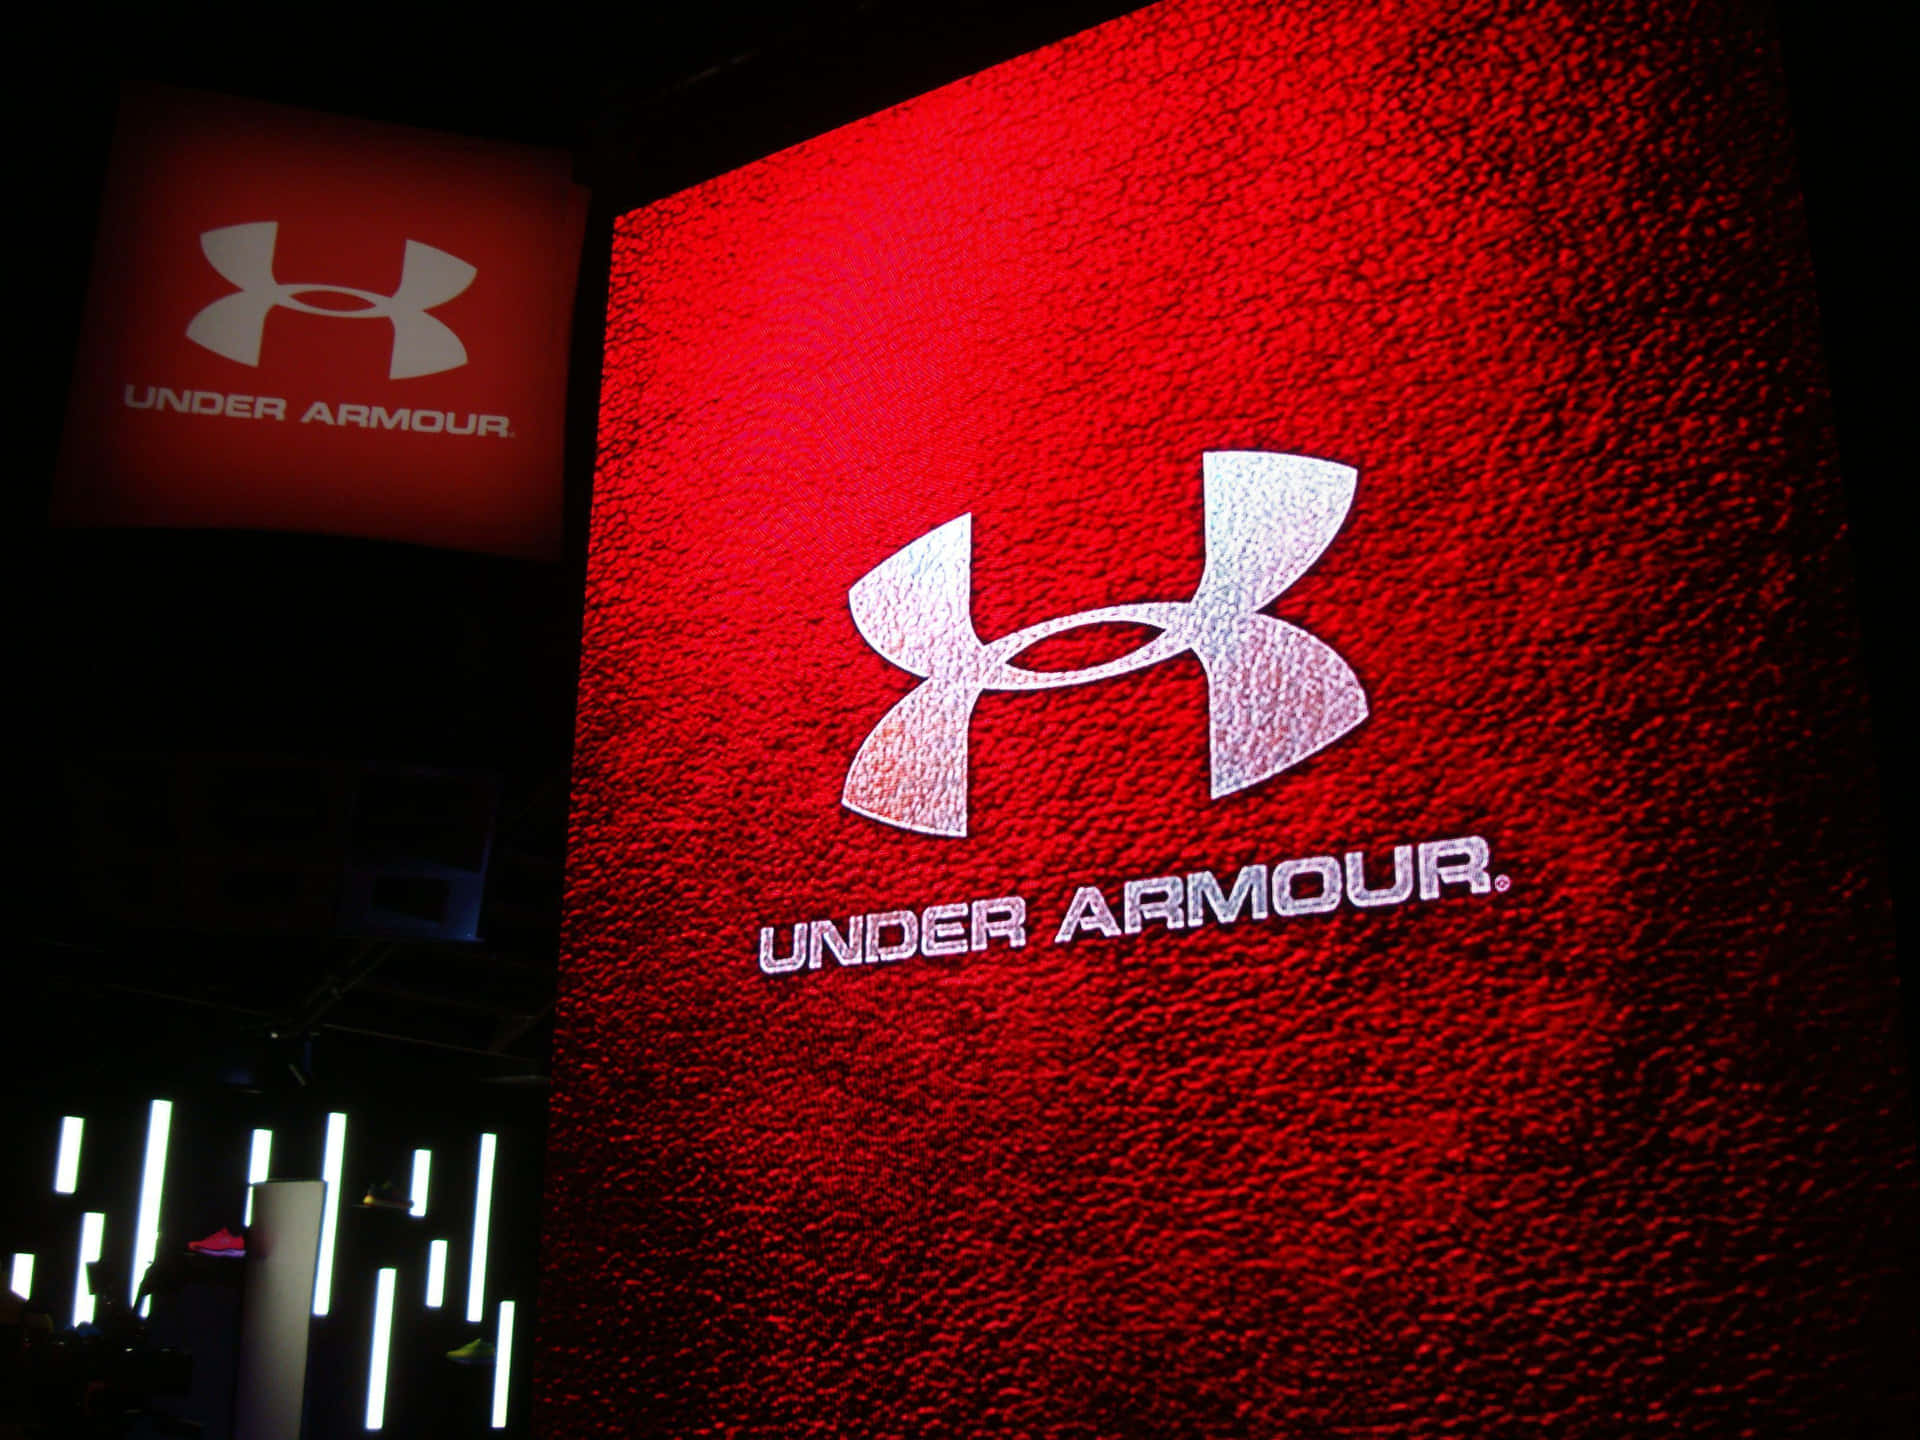 It's time to get active with Under Armour